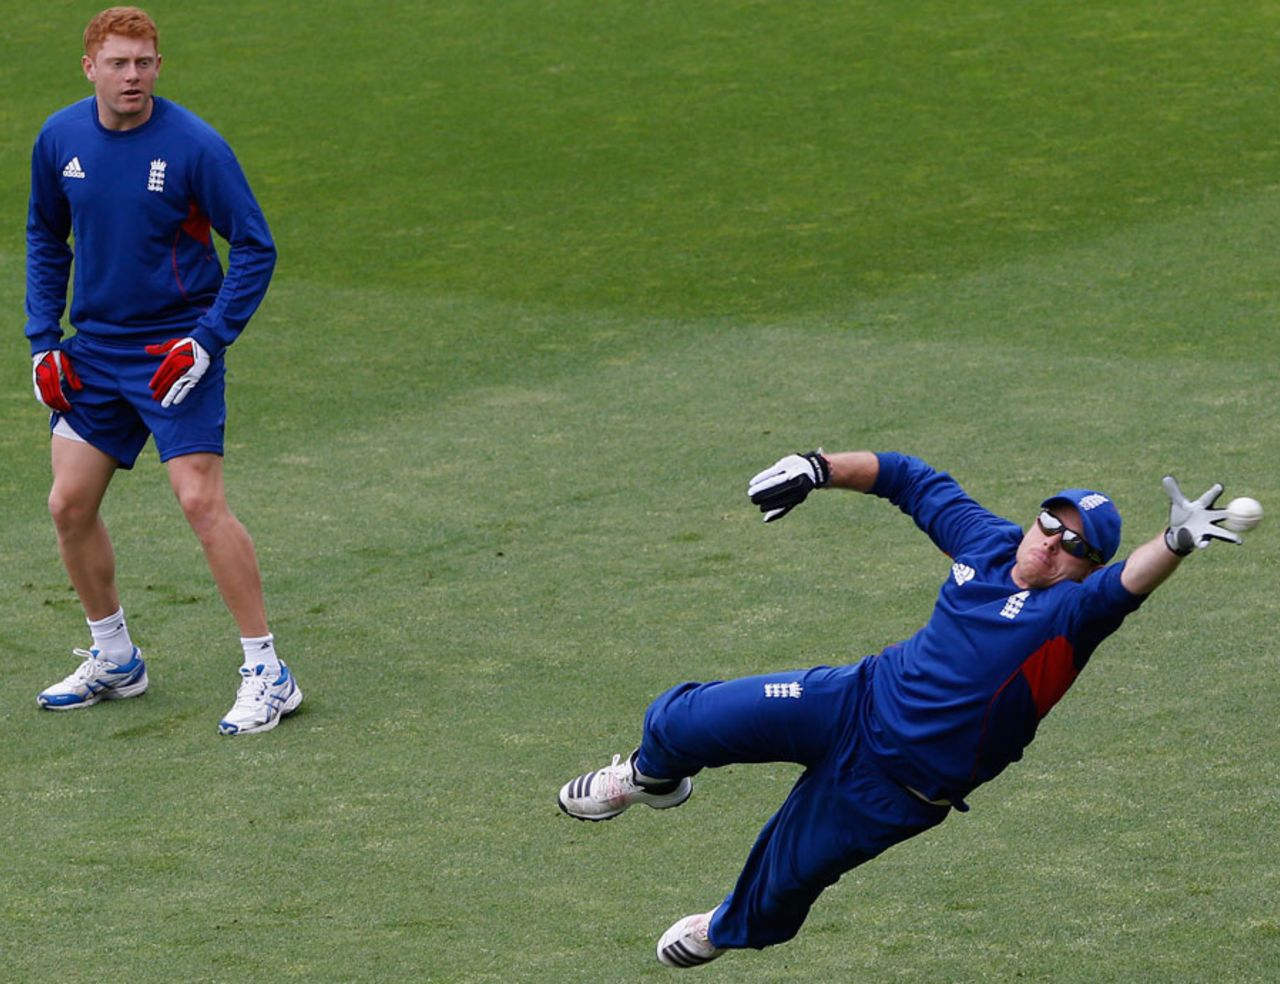 Ian Bell reaches for a catch as Jonny Bairstow looks on, London, June 18, 2013